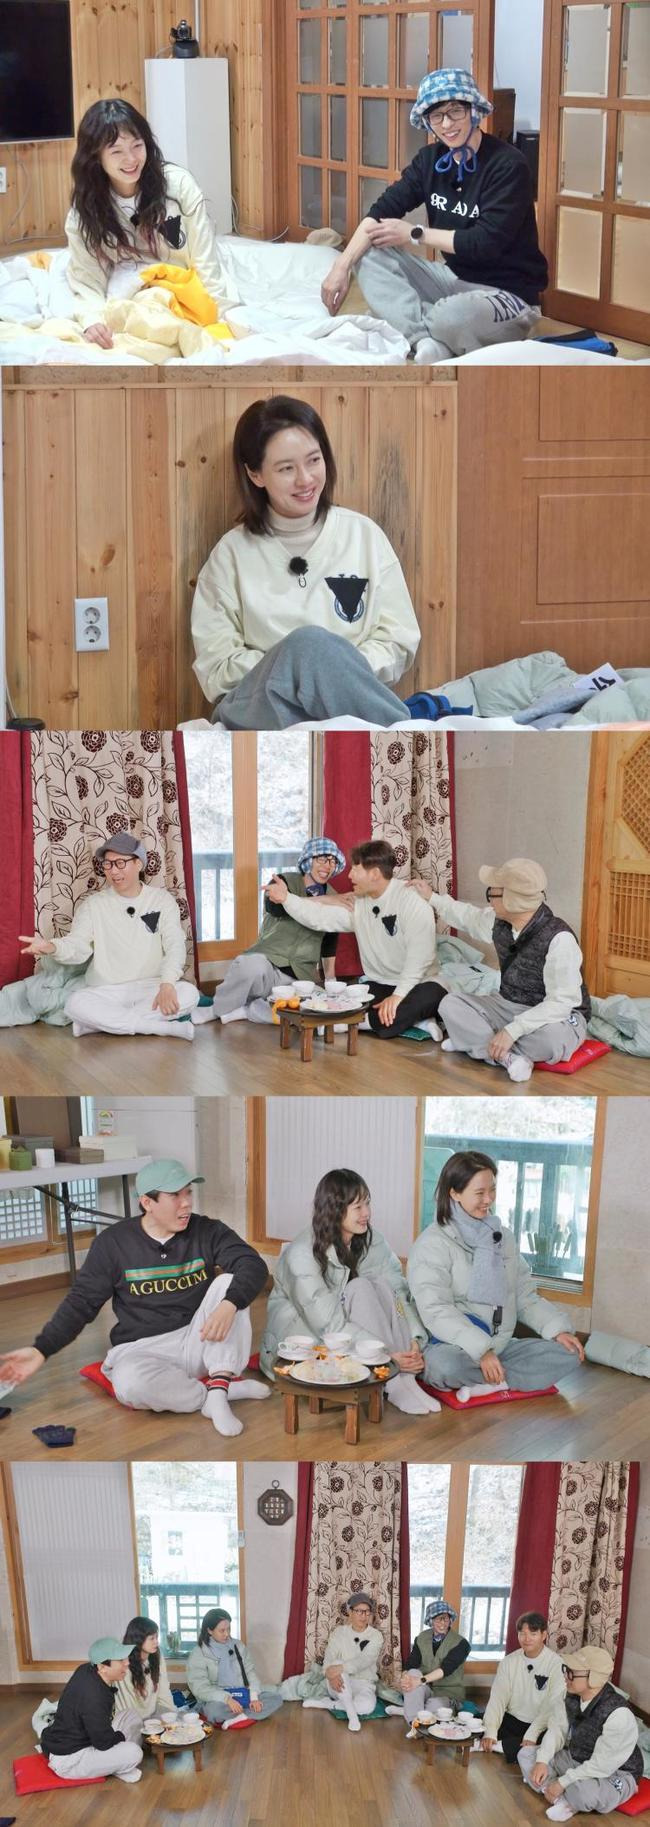 The Running Man members speak their minds.The Truth Game of the members will be unveiled at the SBS entertainment  ⁇  Running Man  ⁇  which is broadcasted on February 12th.Members who have left for Gangwon-do in recent recordings have recreation starting with full-scale MT.At the beginning of the first time, I took time to get a glimpse of the members inner thoughts, and the members poured out a talk to each other, and the members showed a very interesting story.While continuing the heated debate about age, Song Ji-hyo said, Our young people are ..  ⁇   ⁇   ⁇   ⁇   ⁇   ⁇   ⁇   ⁇   ⁇ ..............................Jeon So-min, who watched this, cheered that a word from her sister would cause a big wave, and that she would be called Song Ji-hyo. Generation X Yoo Jae-seok and Kim Jong-kook are also the best adverbs in the first half of the year. I threw my tongue.